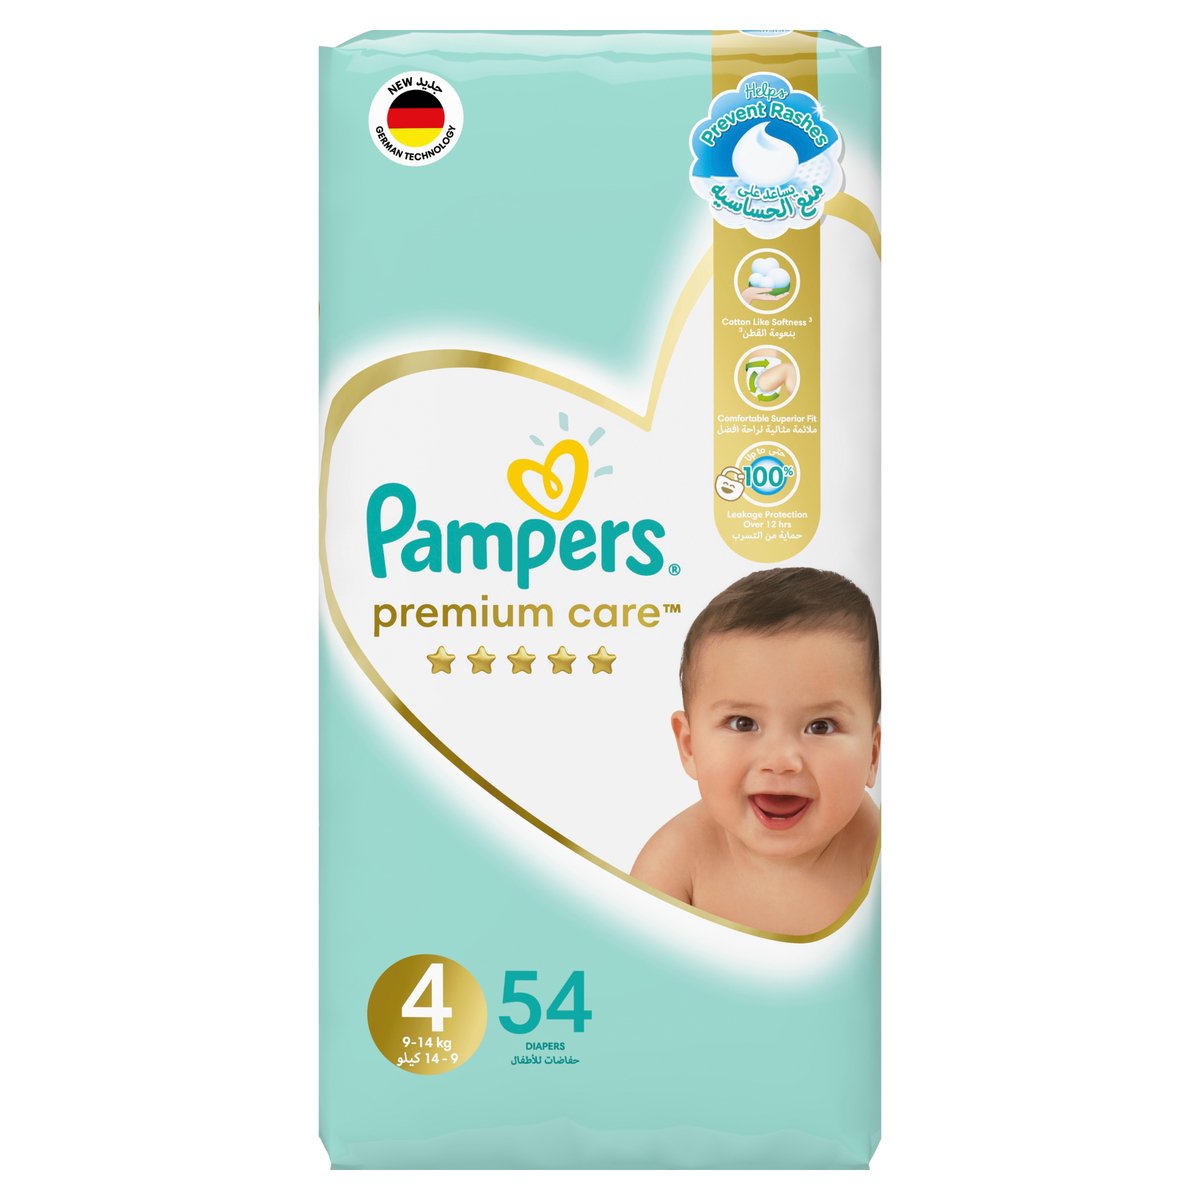 Pampers Premium Care Taped Baby Diapers, Size 4, 9-14 kg, Unique Softest Absorption for Ultimate Skin Protection, 54 pcs